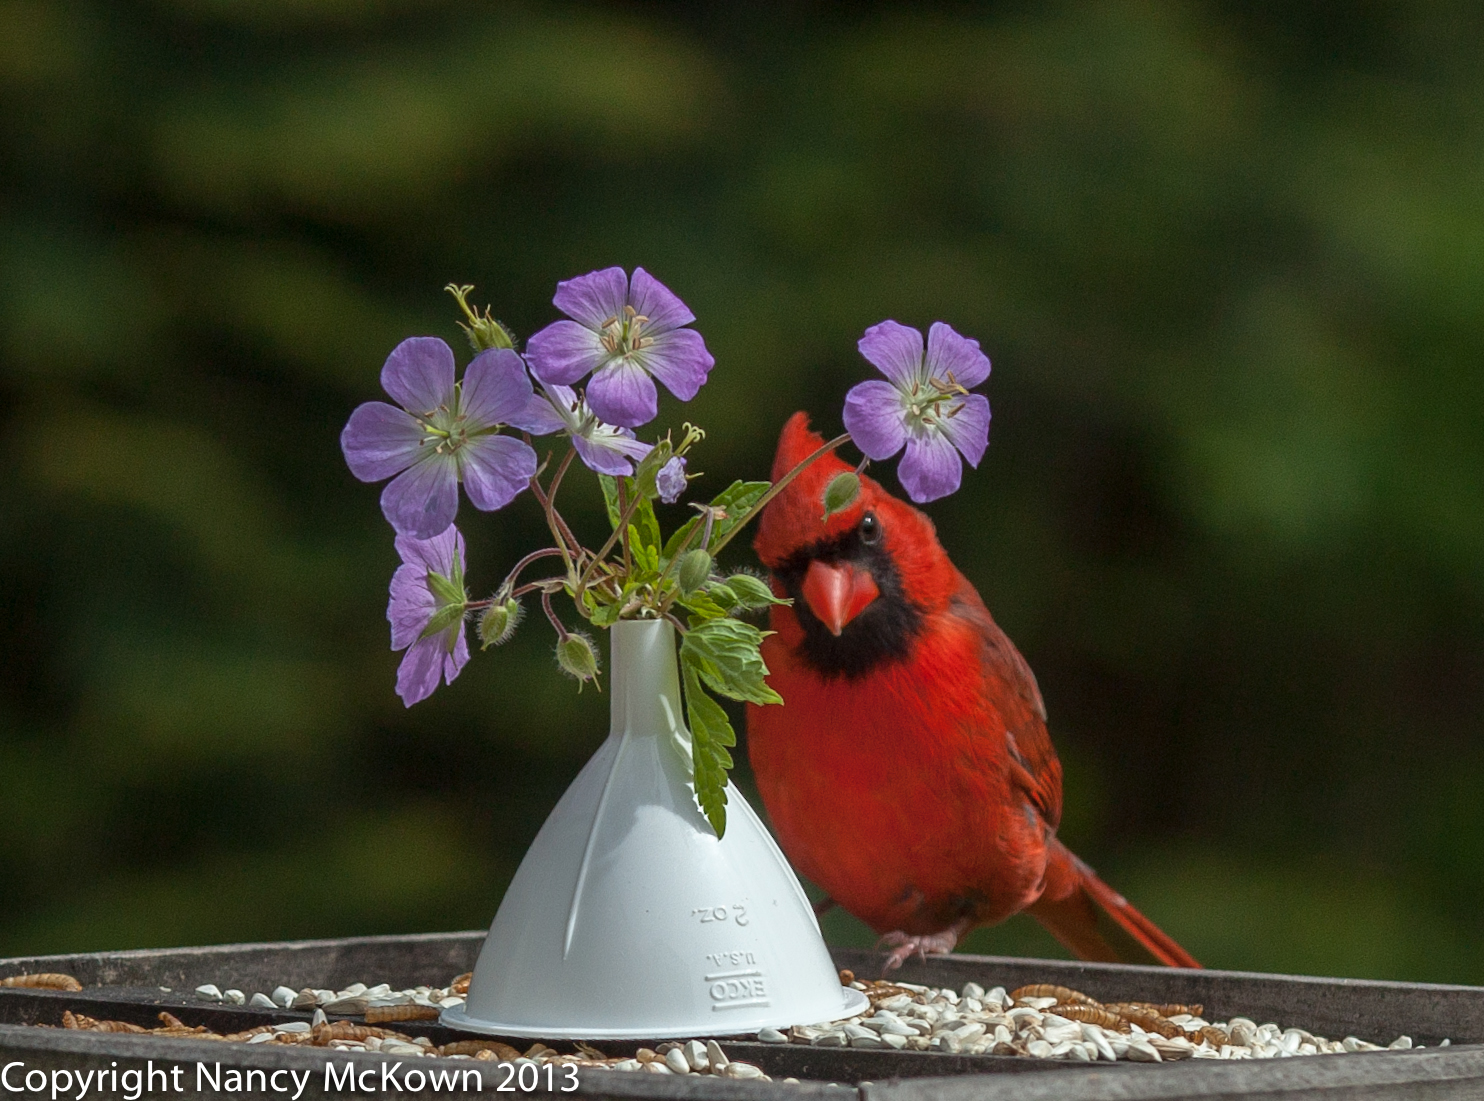 Male Cardinal Posing with Flowers